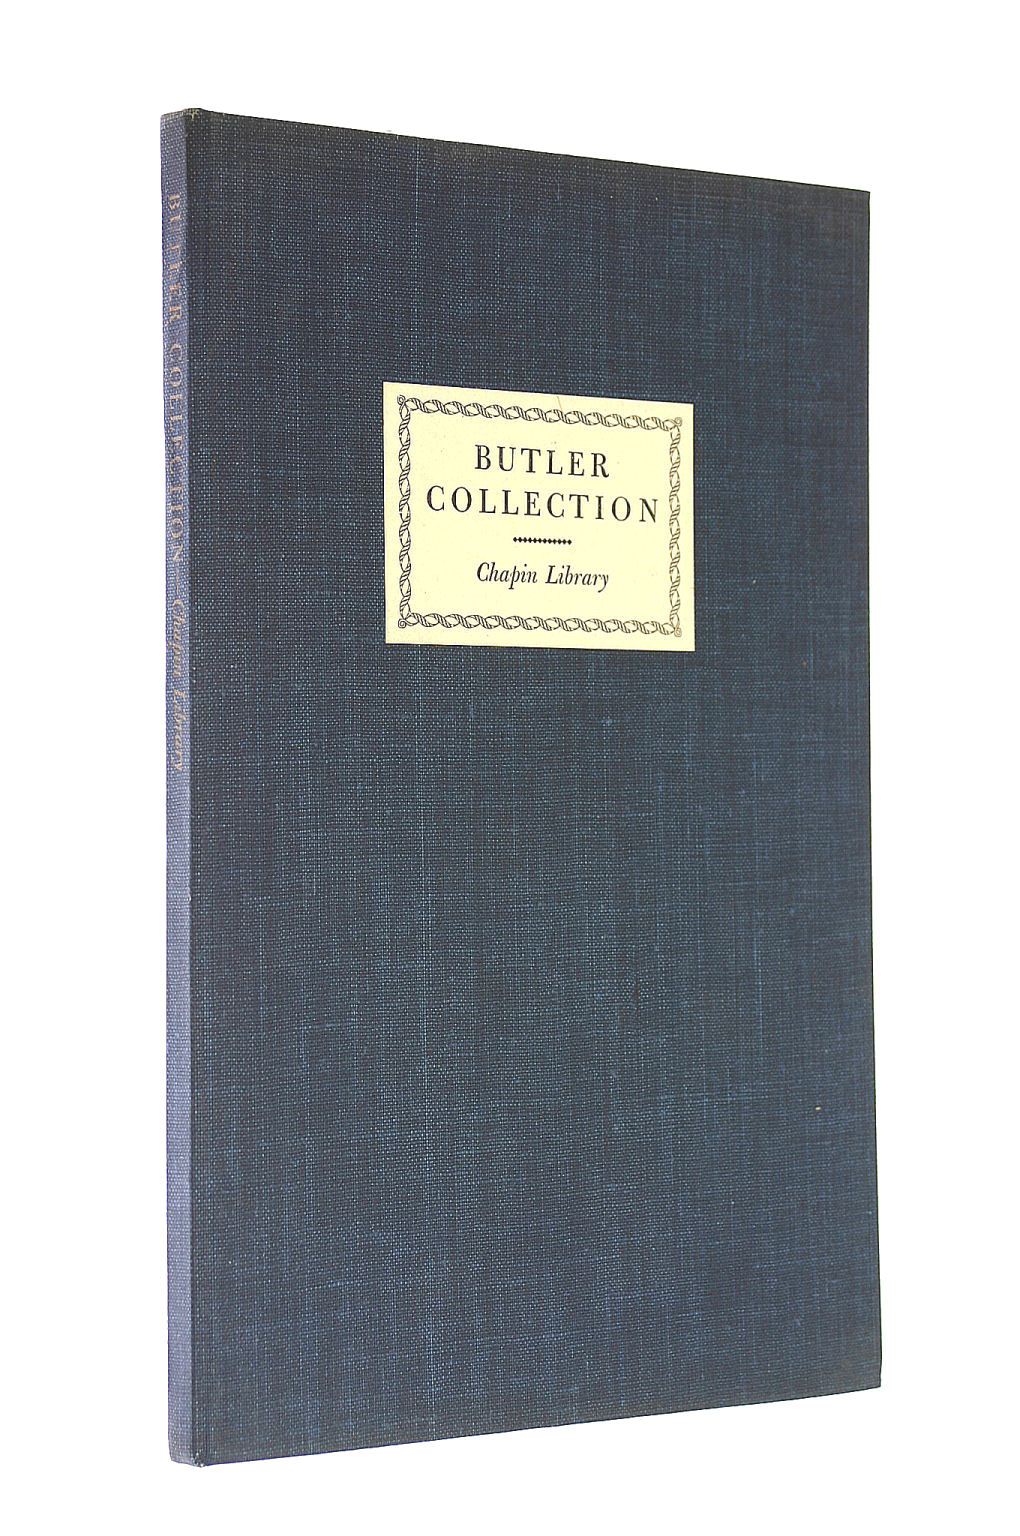 NO AUTHOR. - Catalogue Of The Collection Of Samuel Butler (Of 'Erewhom') In The Chapin Library Williams College, Williamstown, Mass.